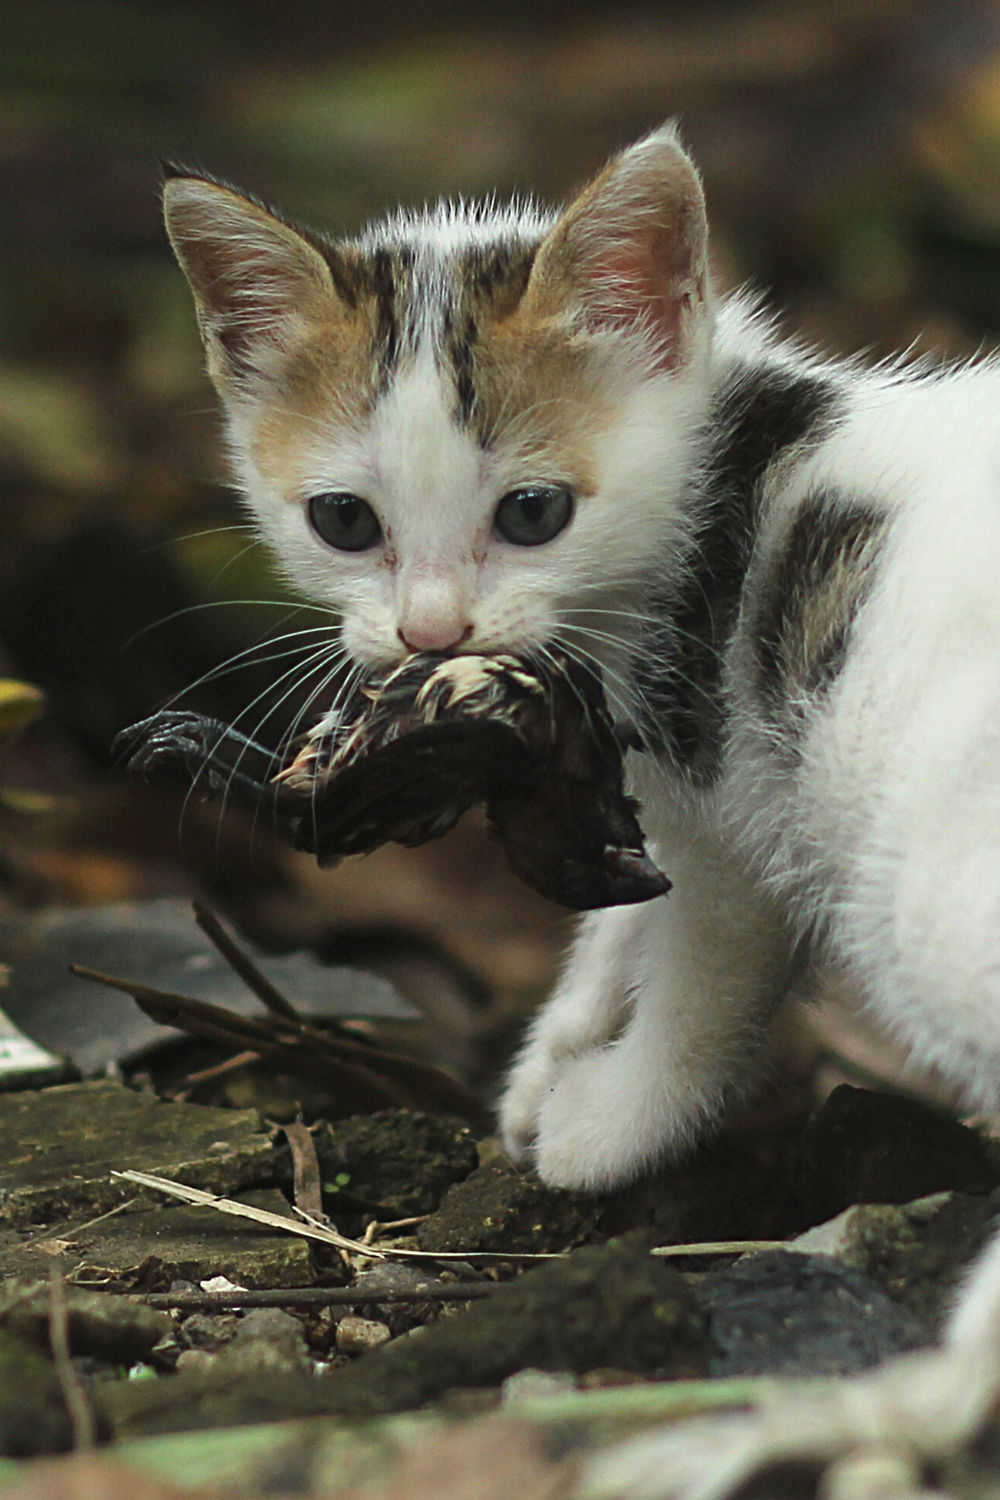 Feral cats eat mainly birds and small rodents like mice